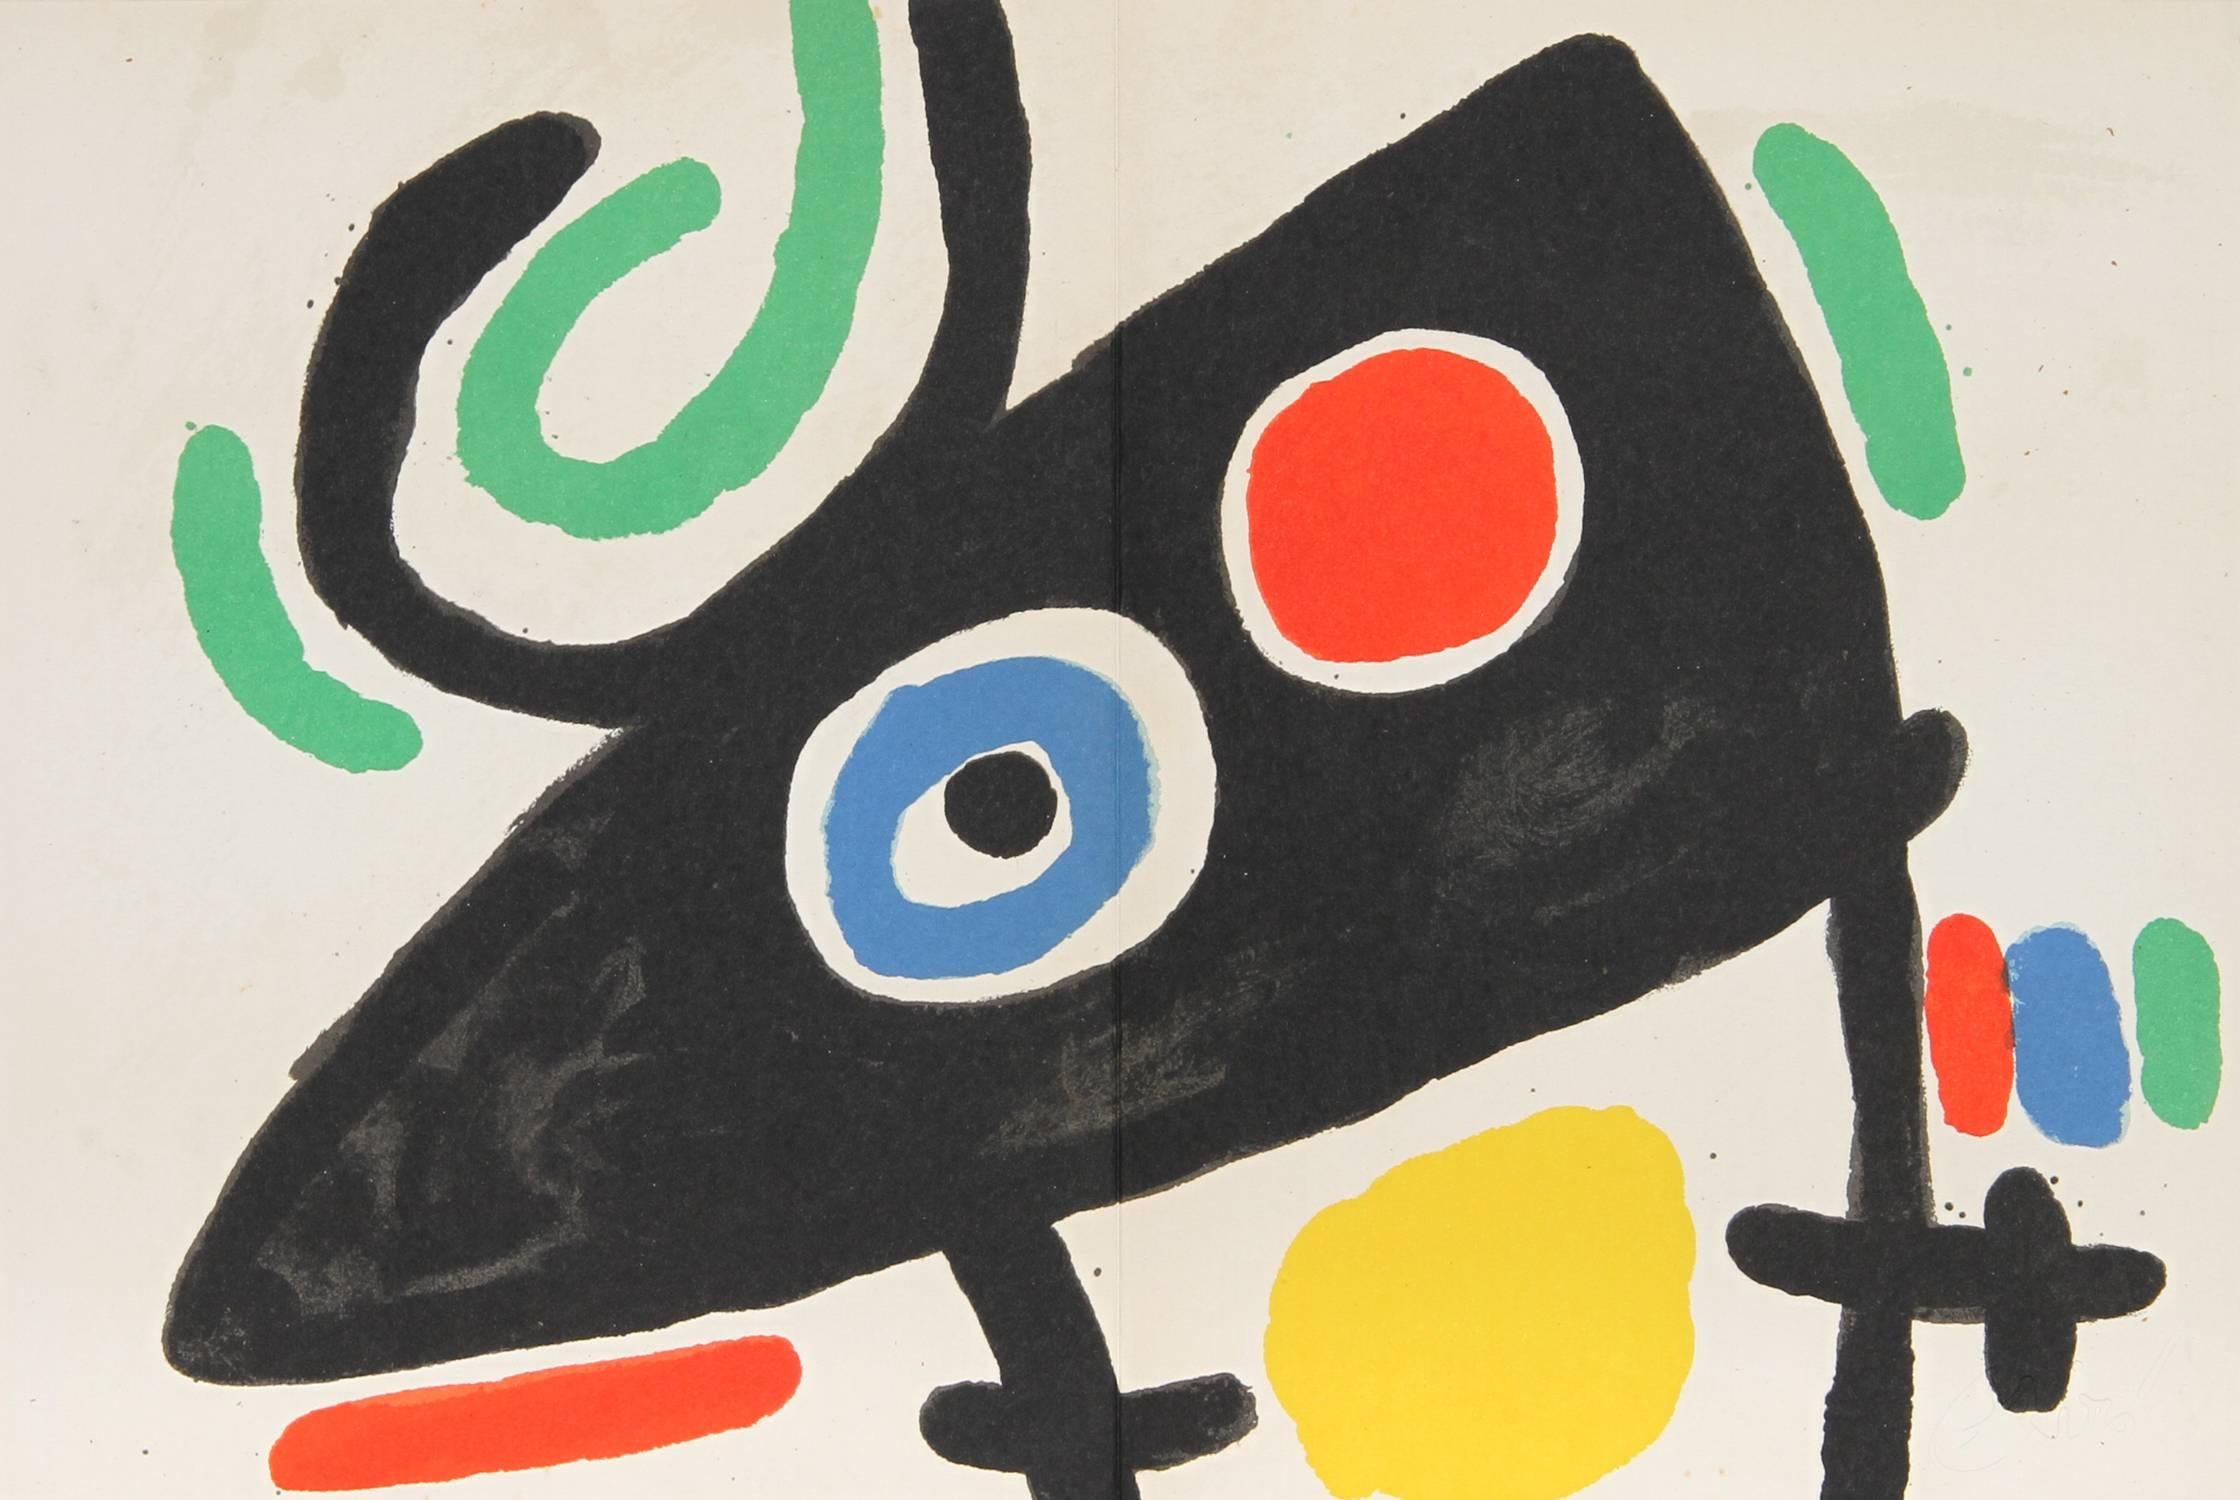 Joan Miró Abstract Print - untitled from Tapis de Tarragona, Lithograph by Joan Miro